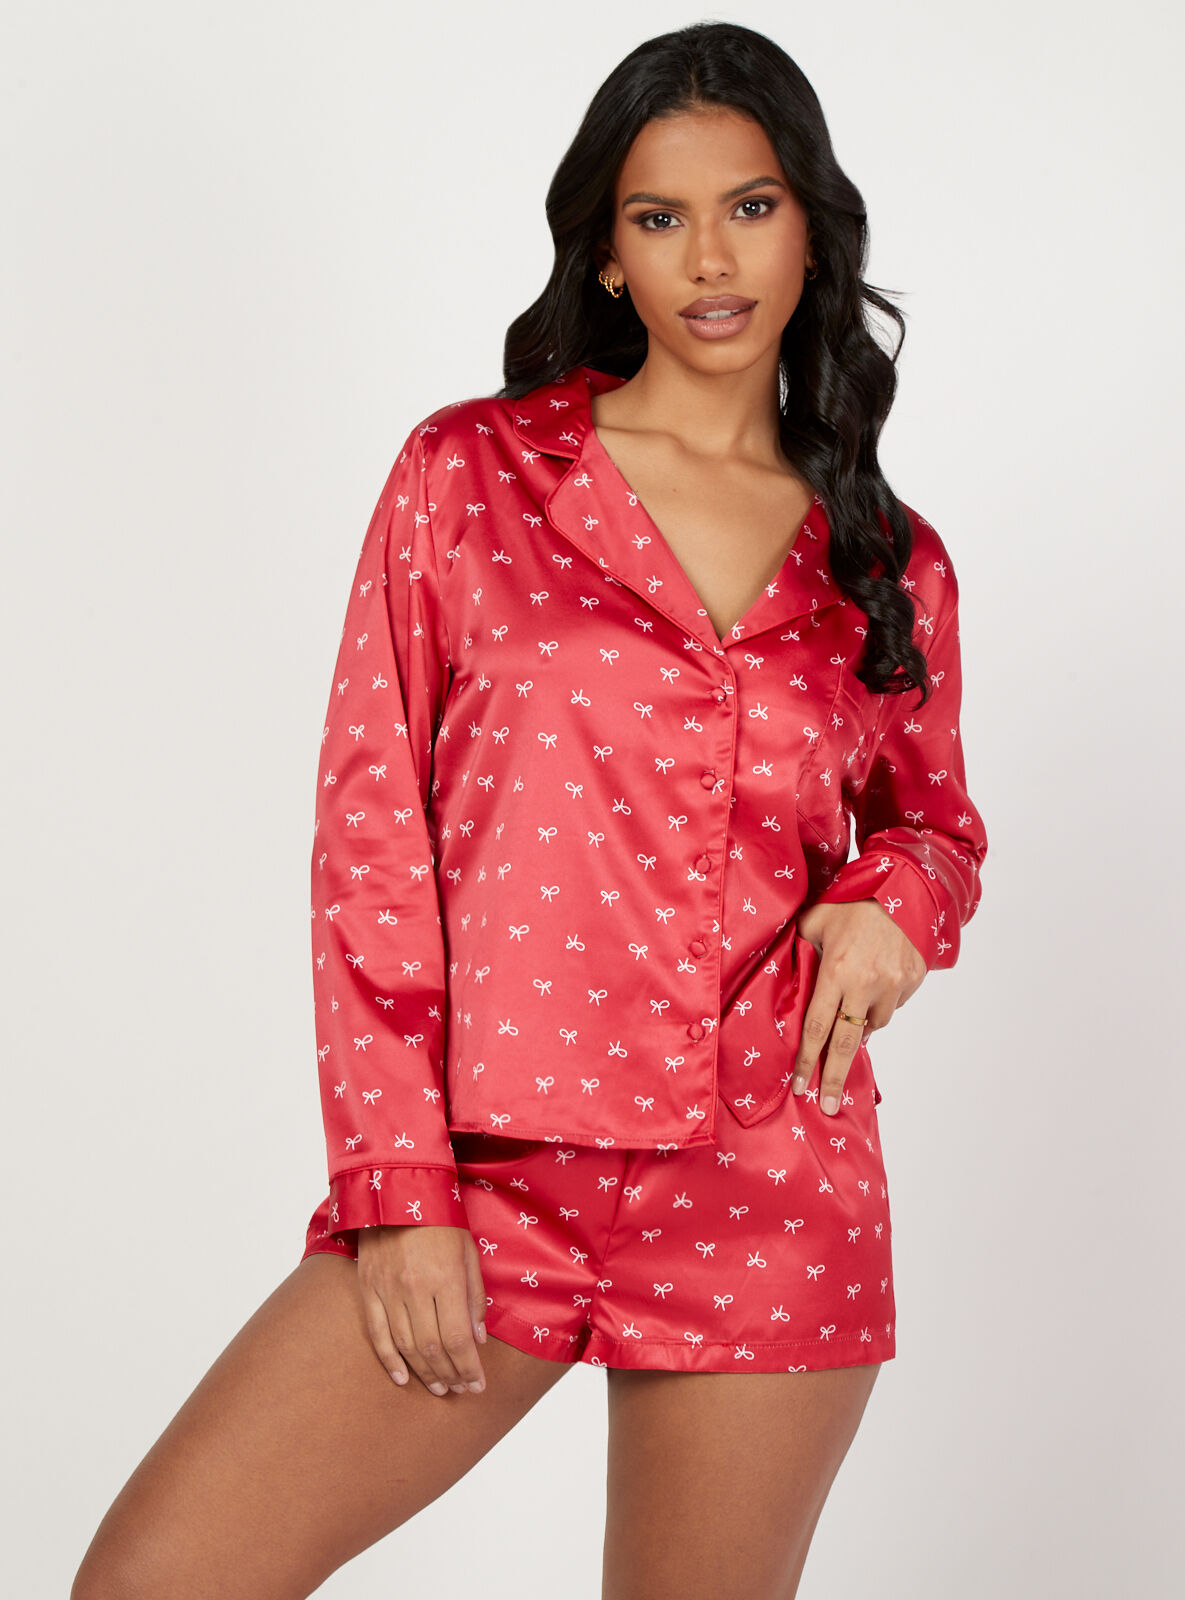 Boux Avenue Bow print satin revere and shorts set - Red Mix - 16